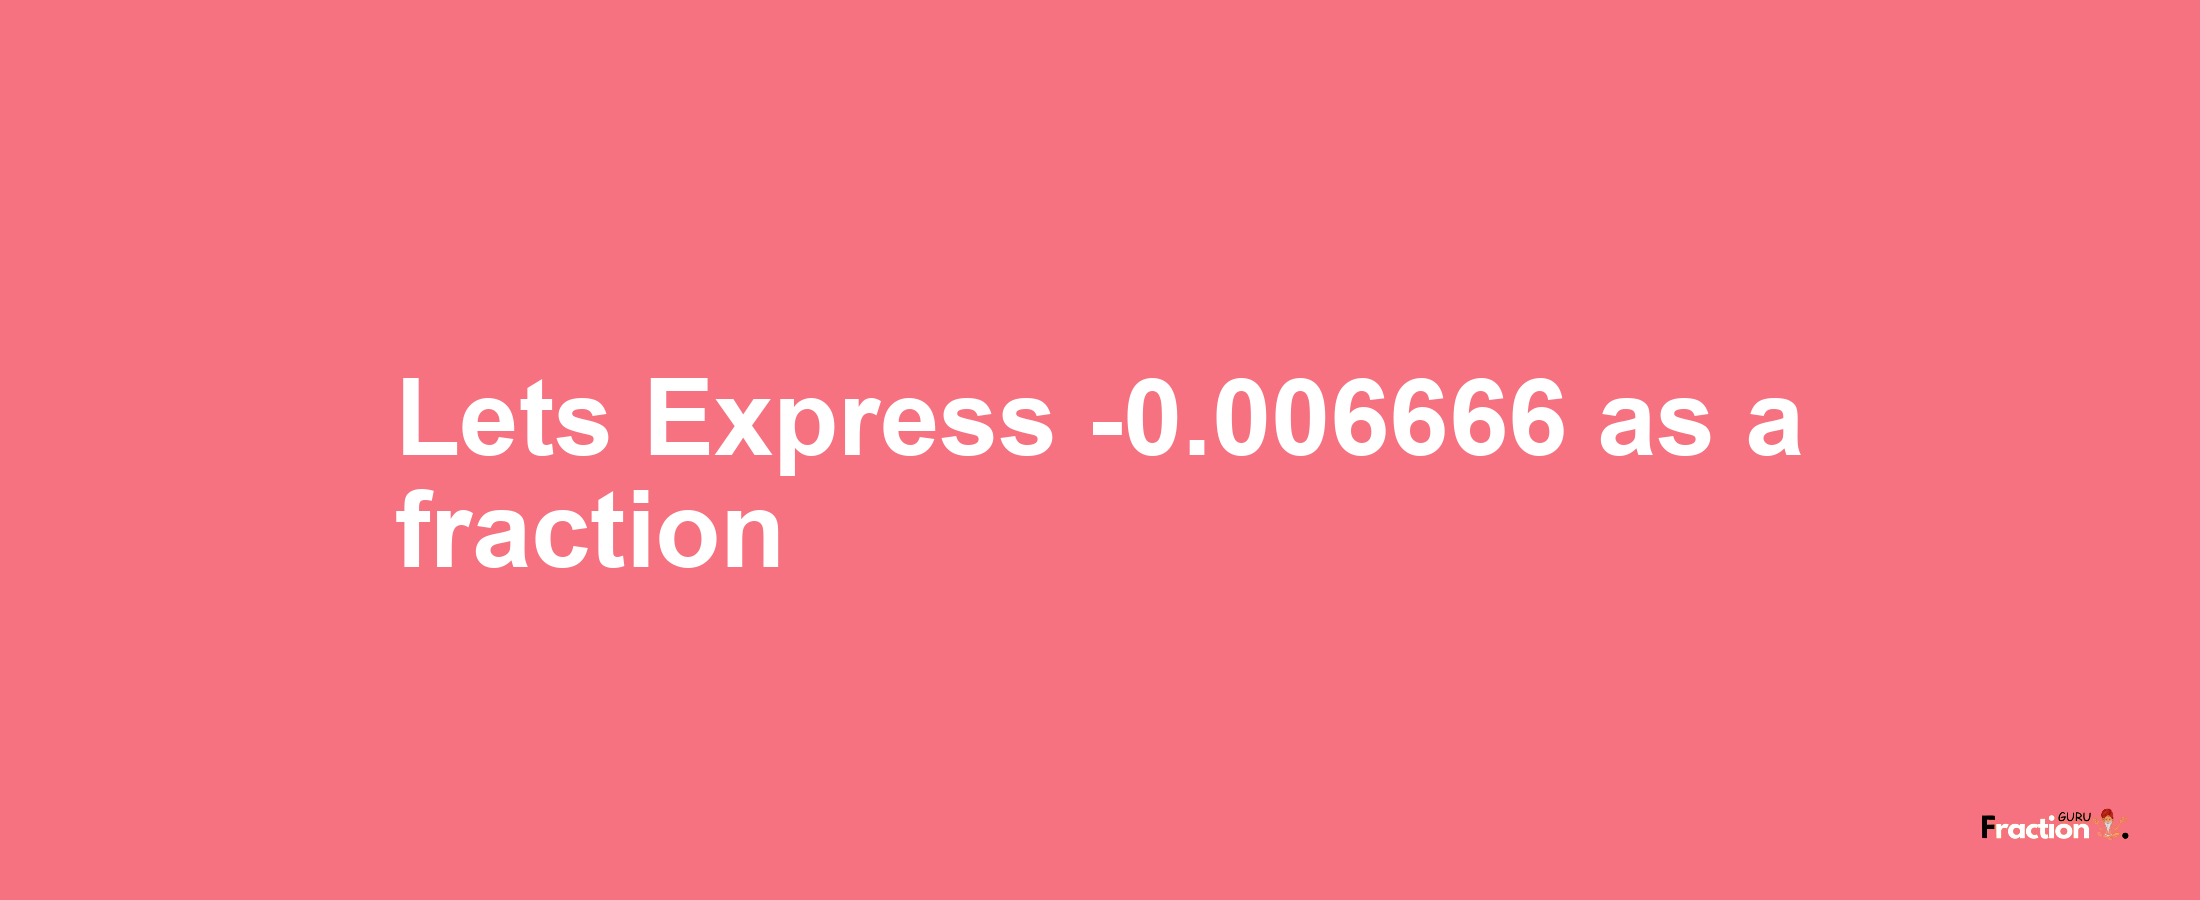 Lets Express -0.006666 as afraction